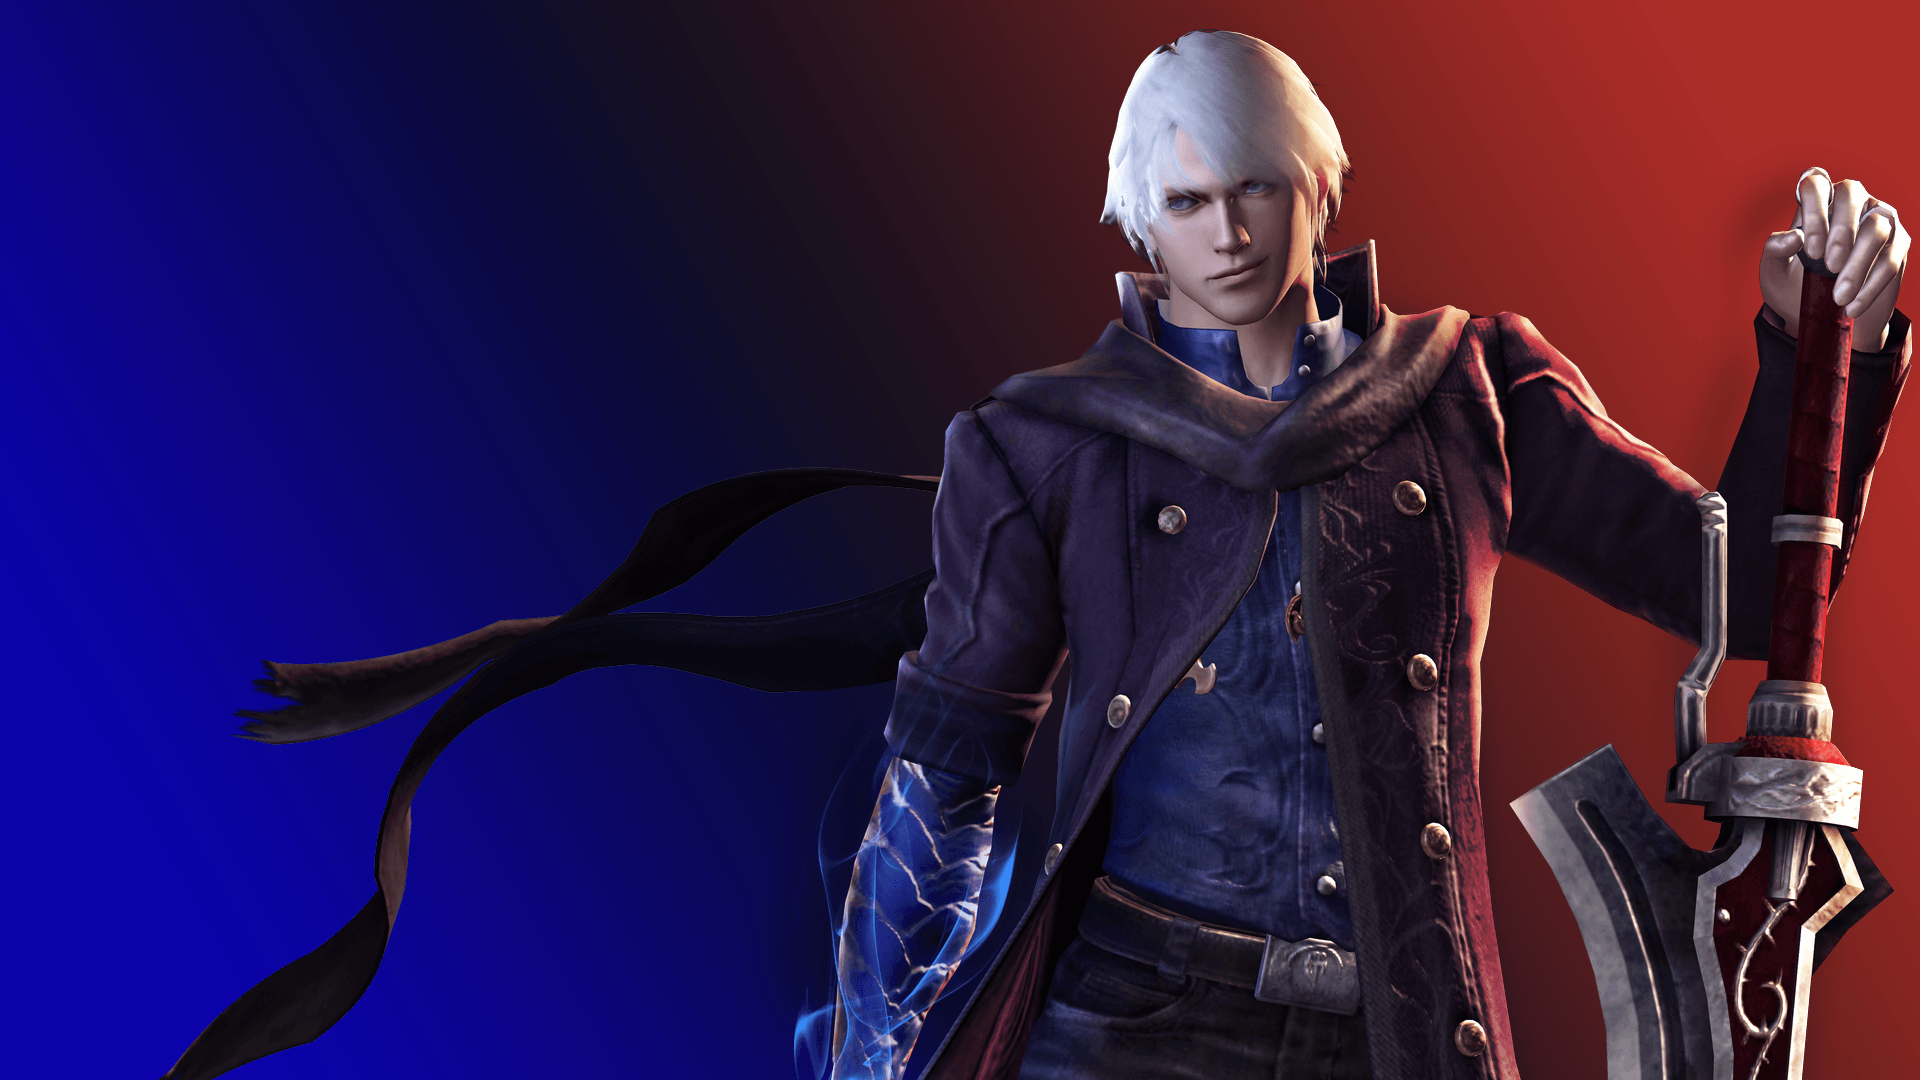 Made a quick wallpaper to celebrate my DMC4SE hype